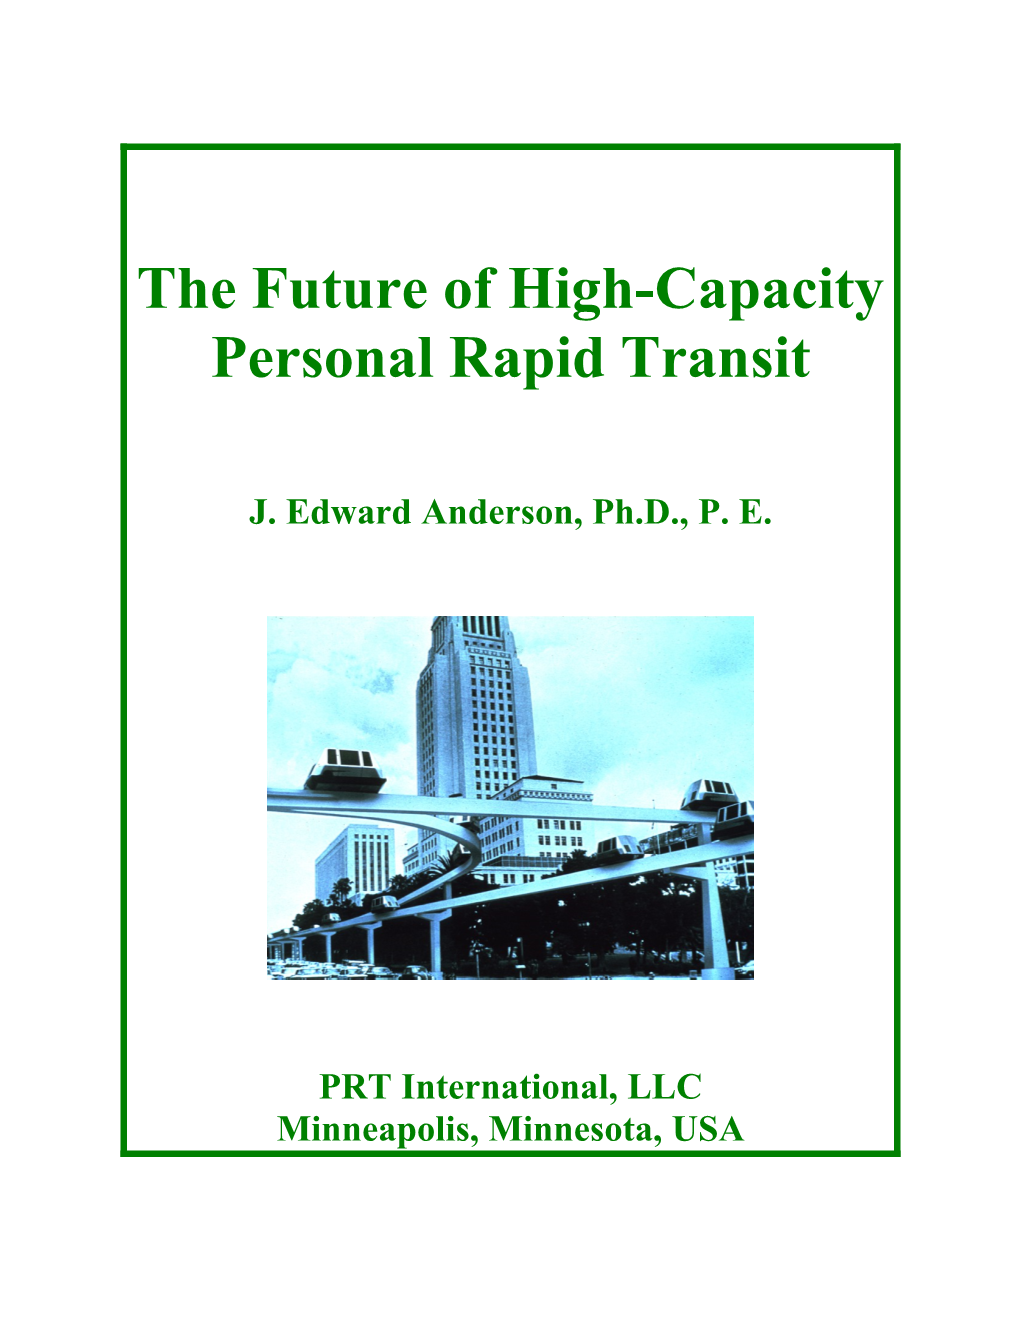 The Future of High-Capacity Personal Rapid Transit